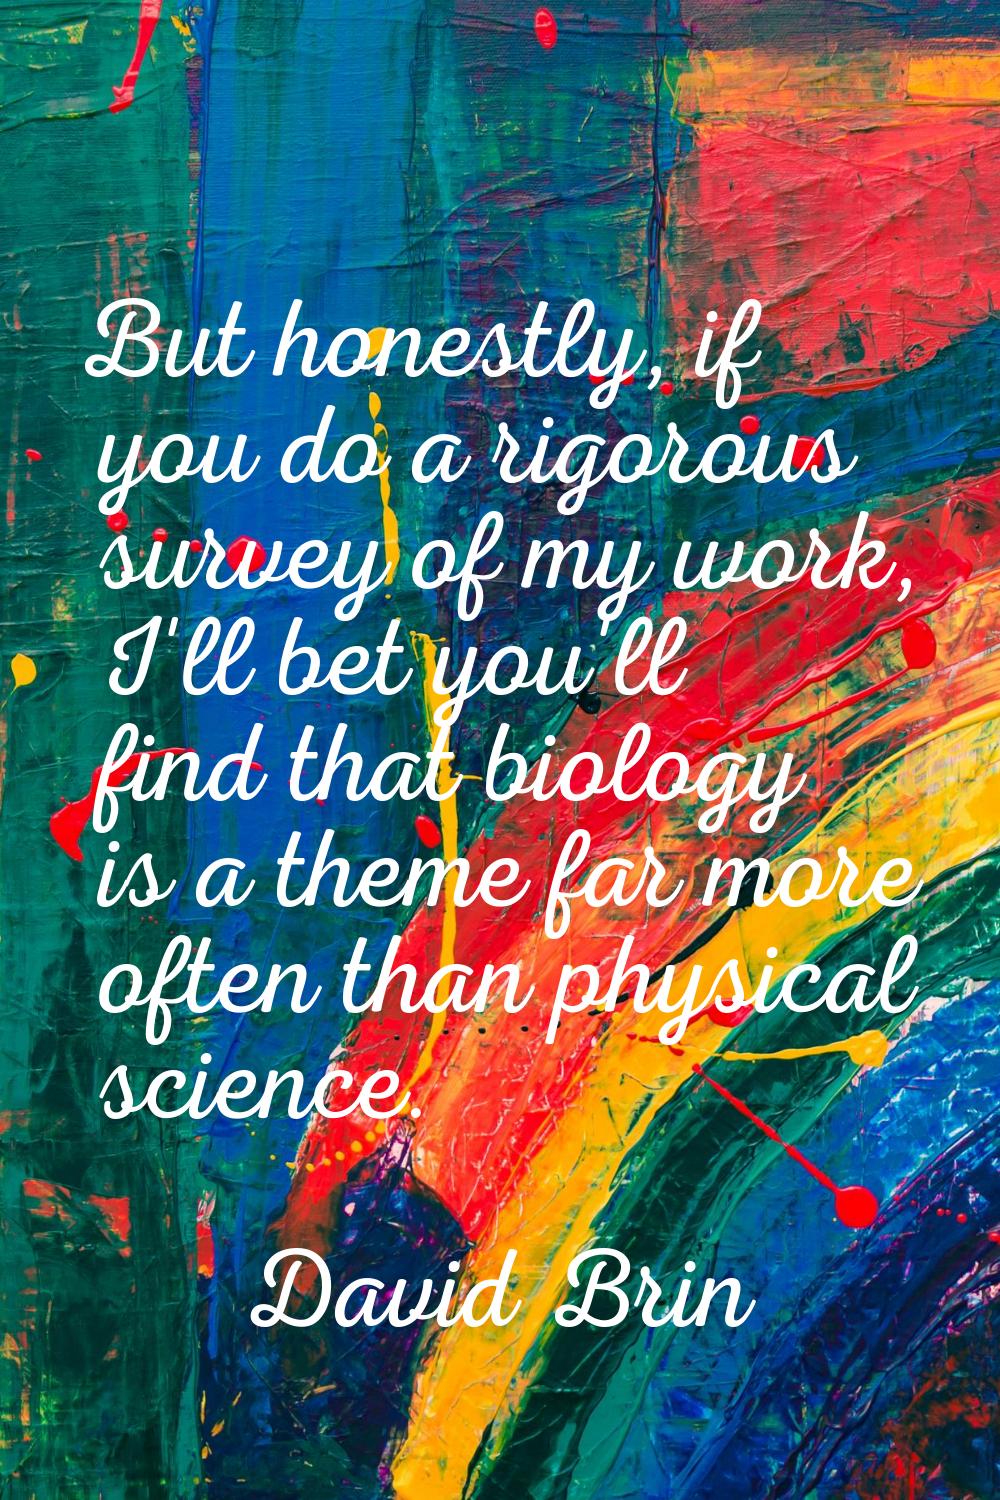 But honestly, if you do a rigorous survey of my work, I'll bet you'll find that biology is a theme 